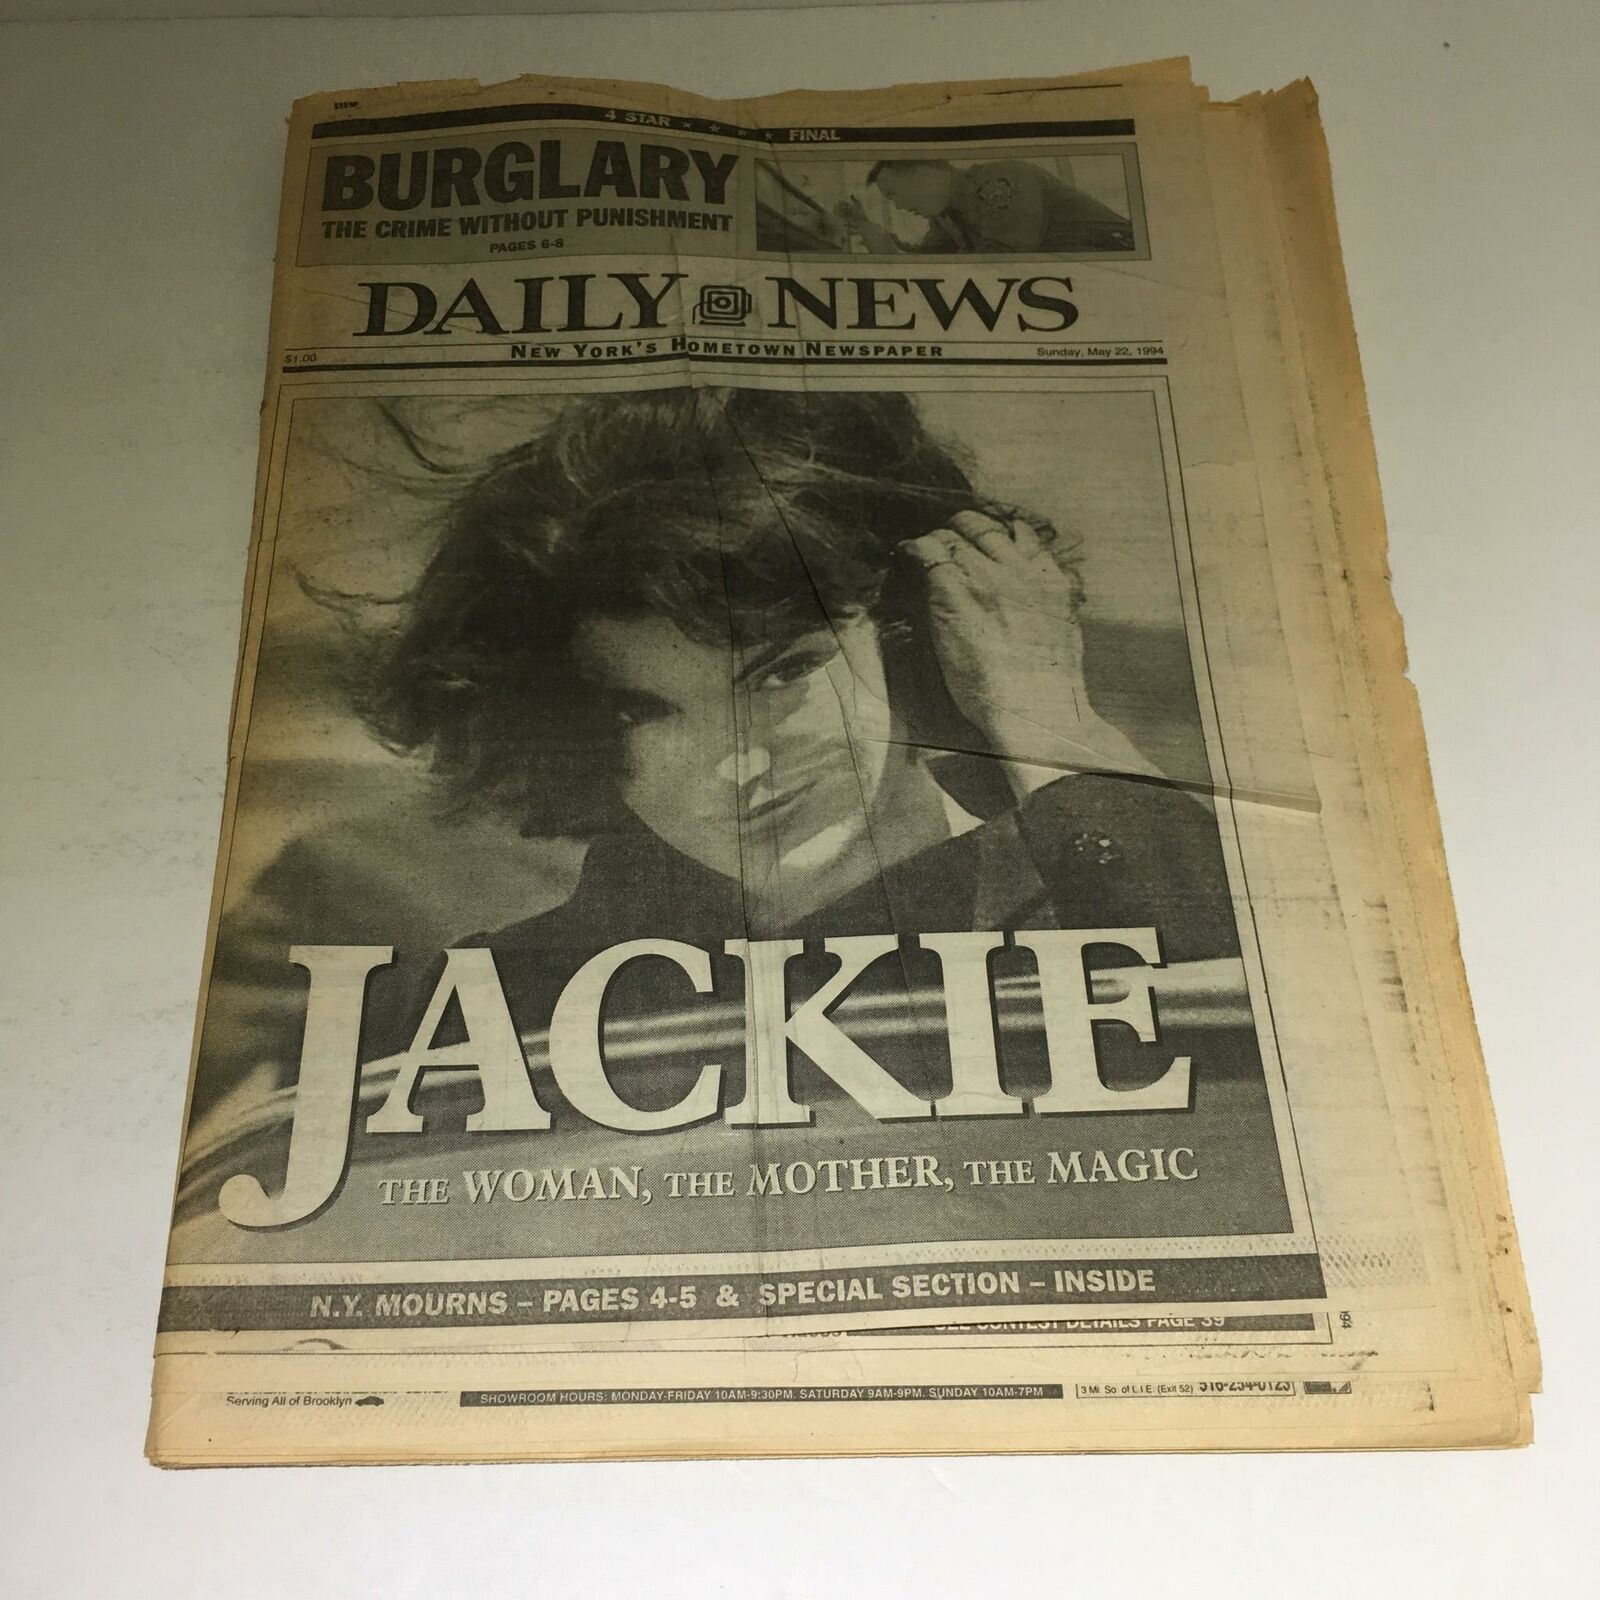 New York Daily News: May 22 1994 Jackie, The Woman, The Mother, The Magic